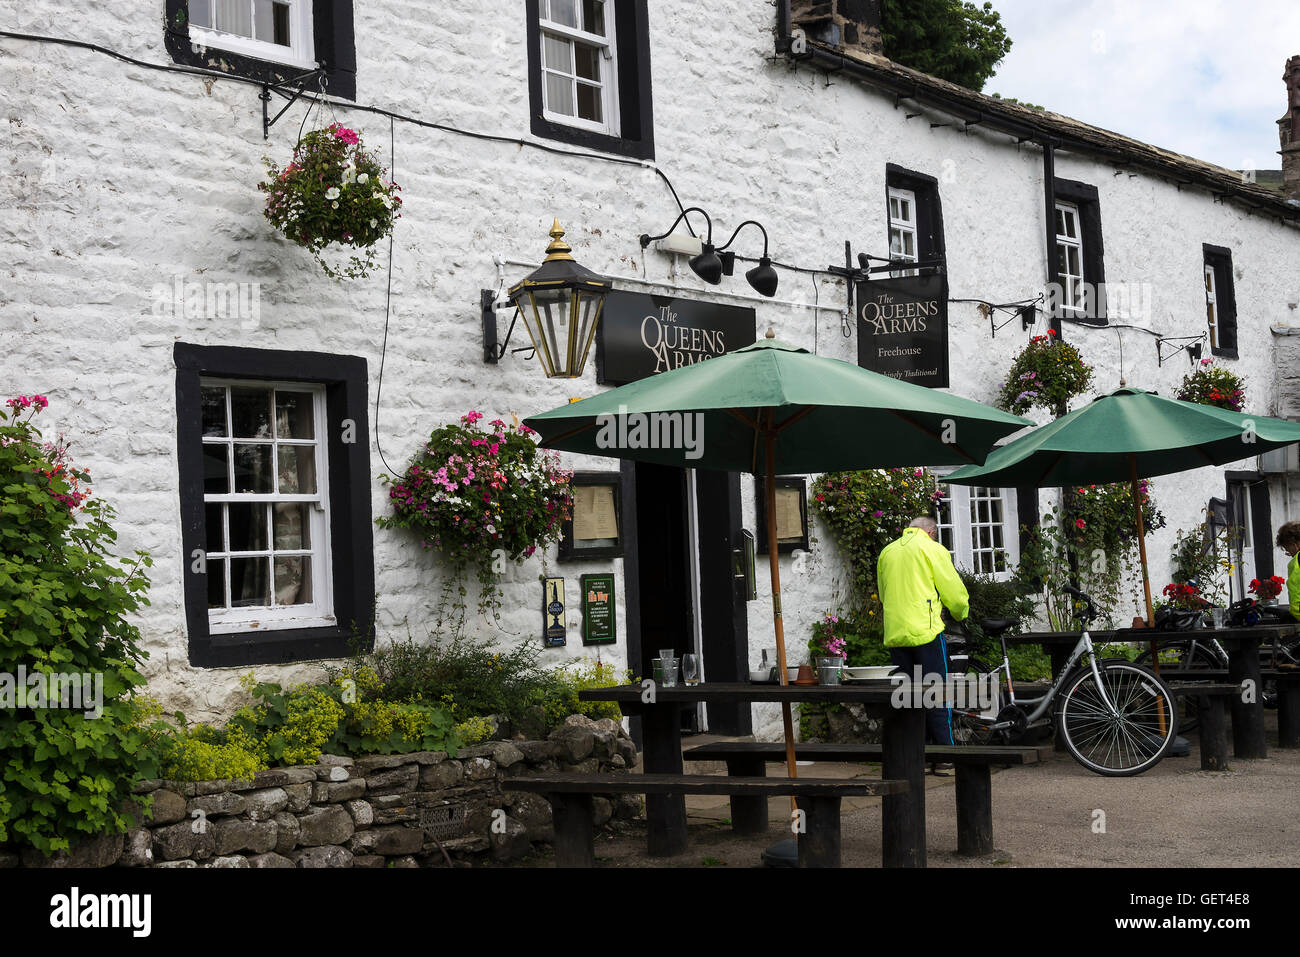 The Queens Arms Public House and Hotel at Litton in Littondale Yorkshire Dales National Park England United Kingdom UK Stock Photo